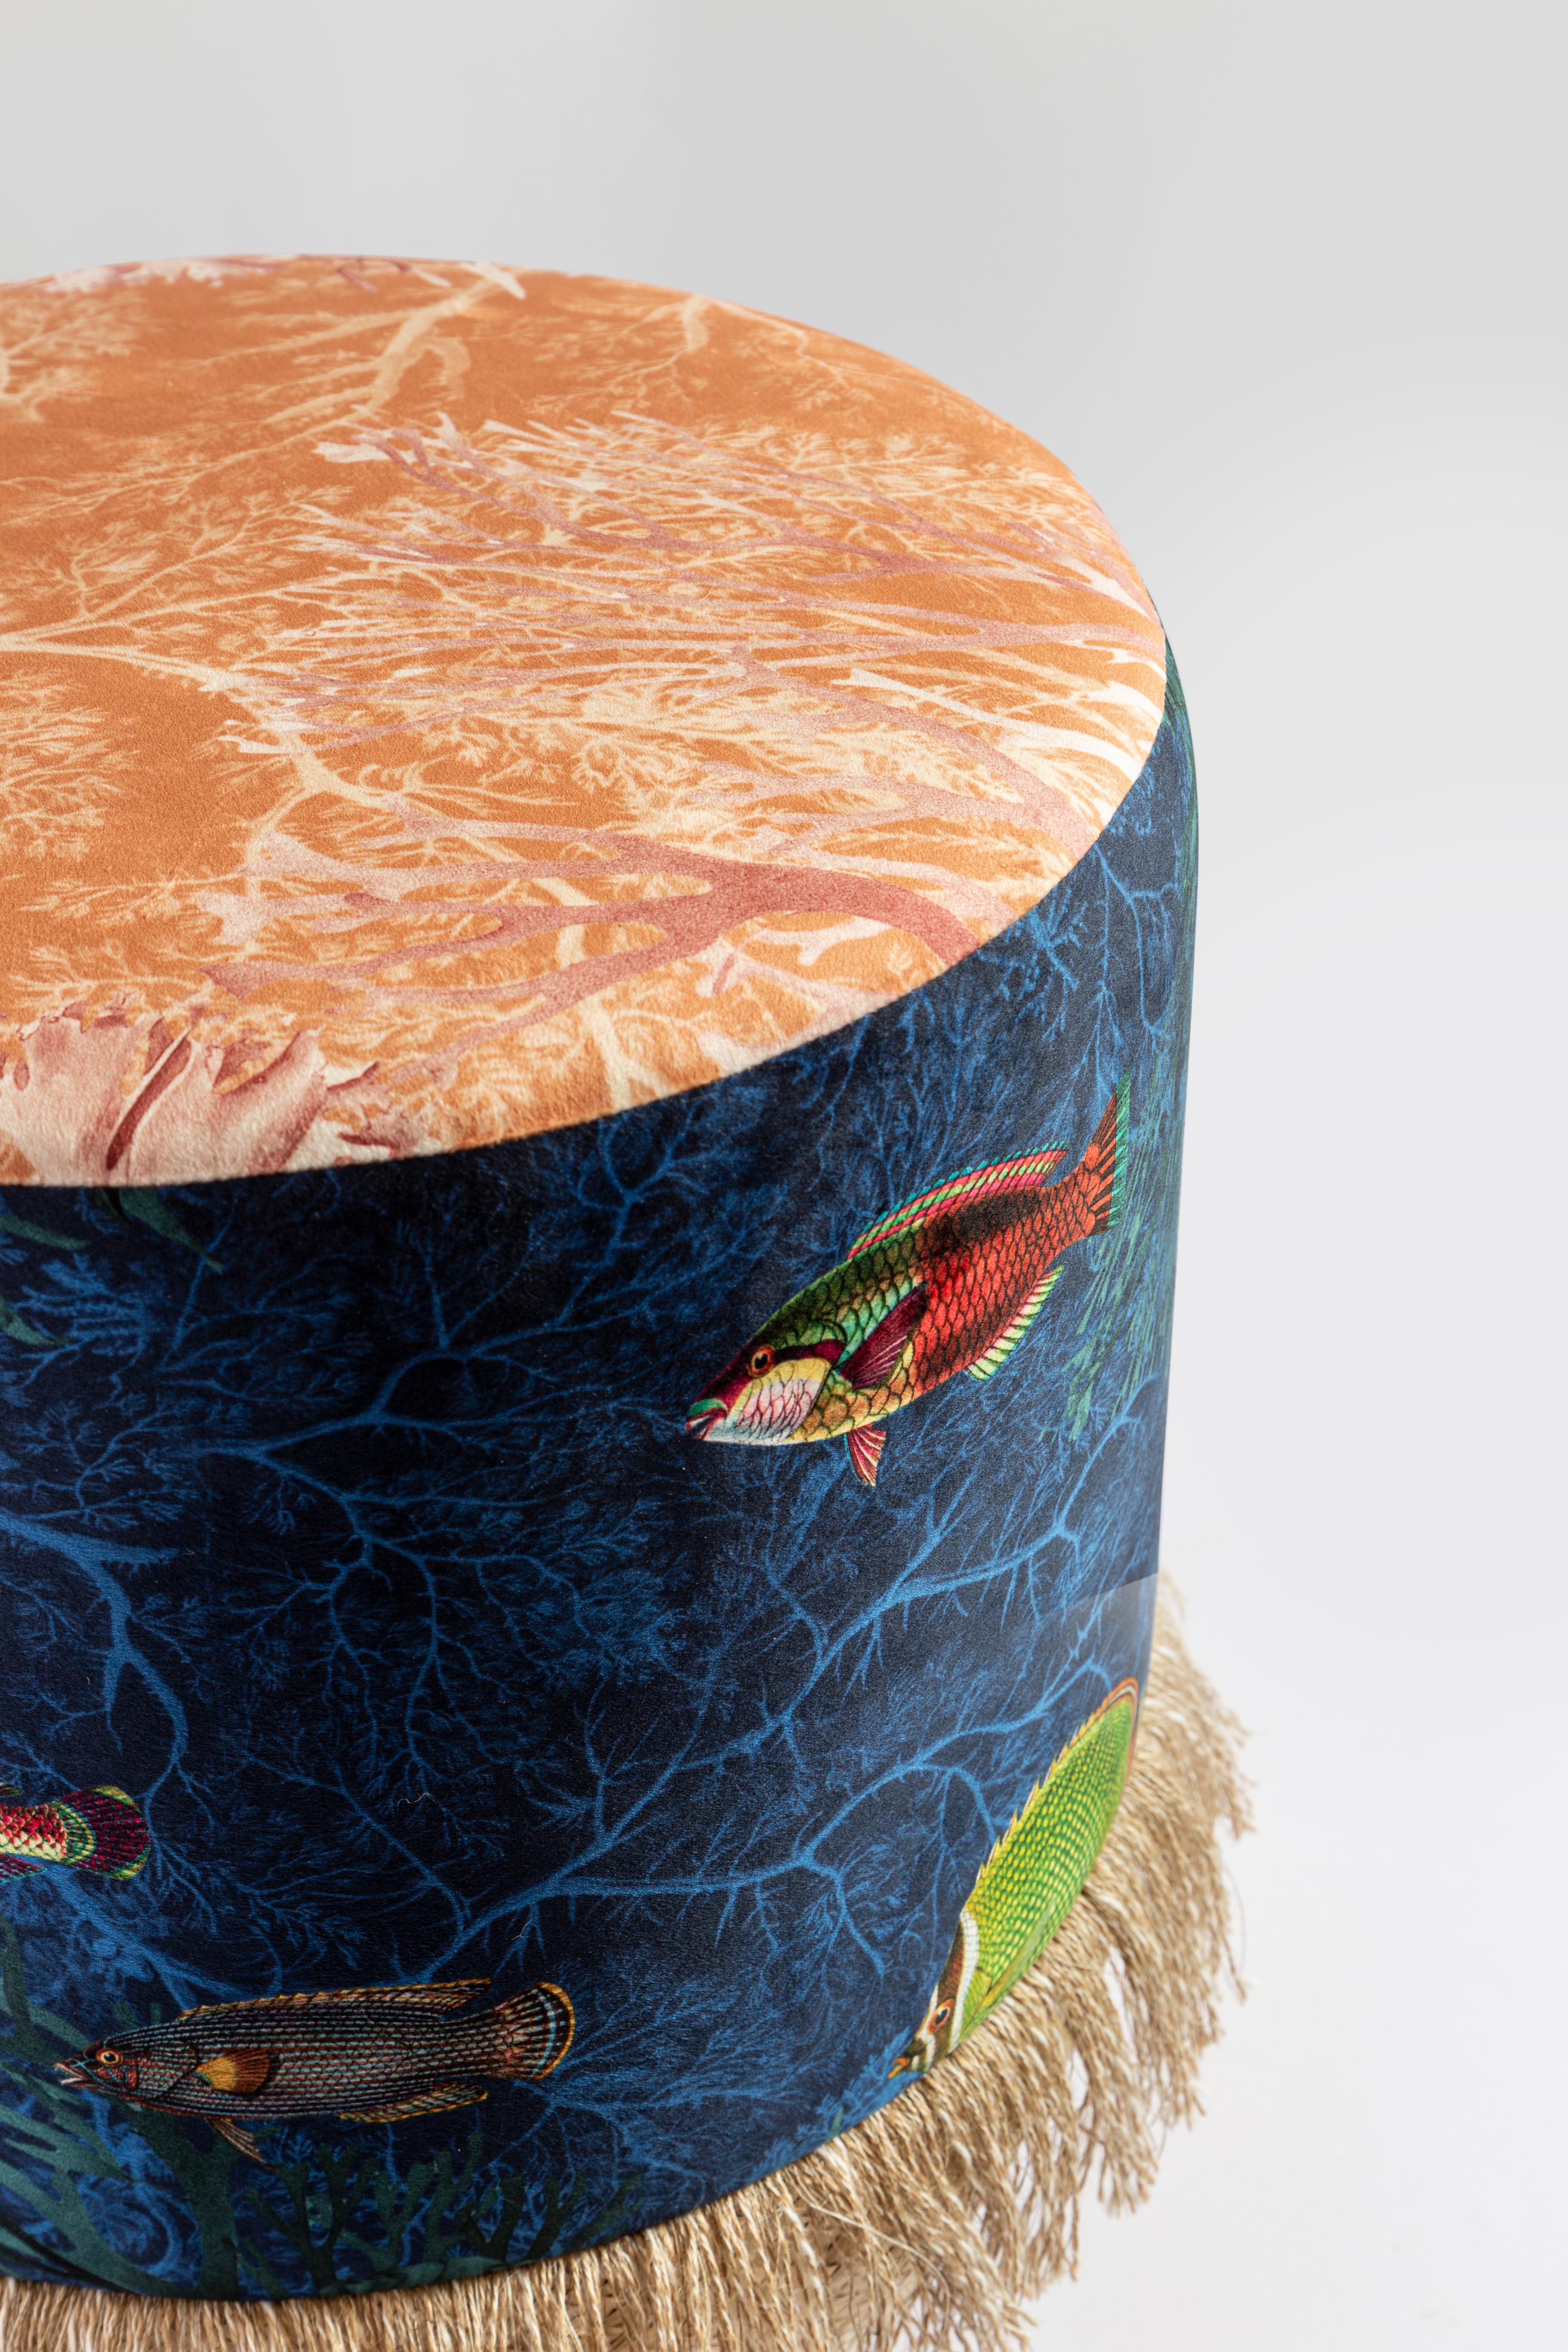 Italian Amami, Contemporary Printed Velvet and Natural Strew Pouf by Vito Nesta For Sale